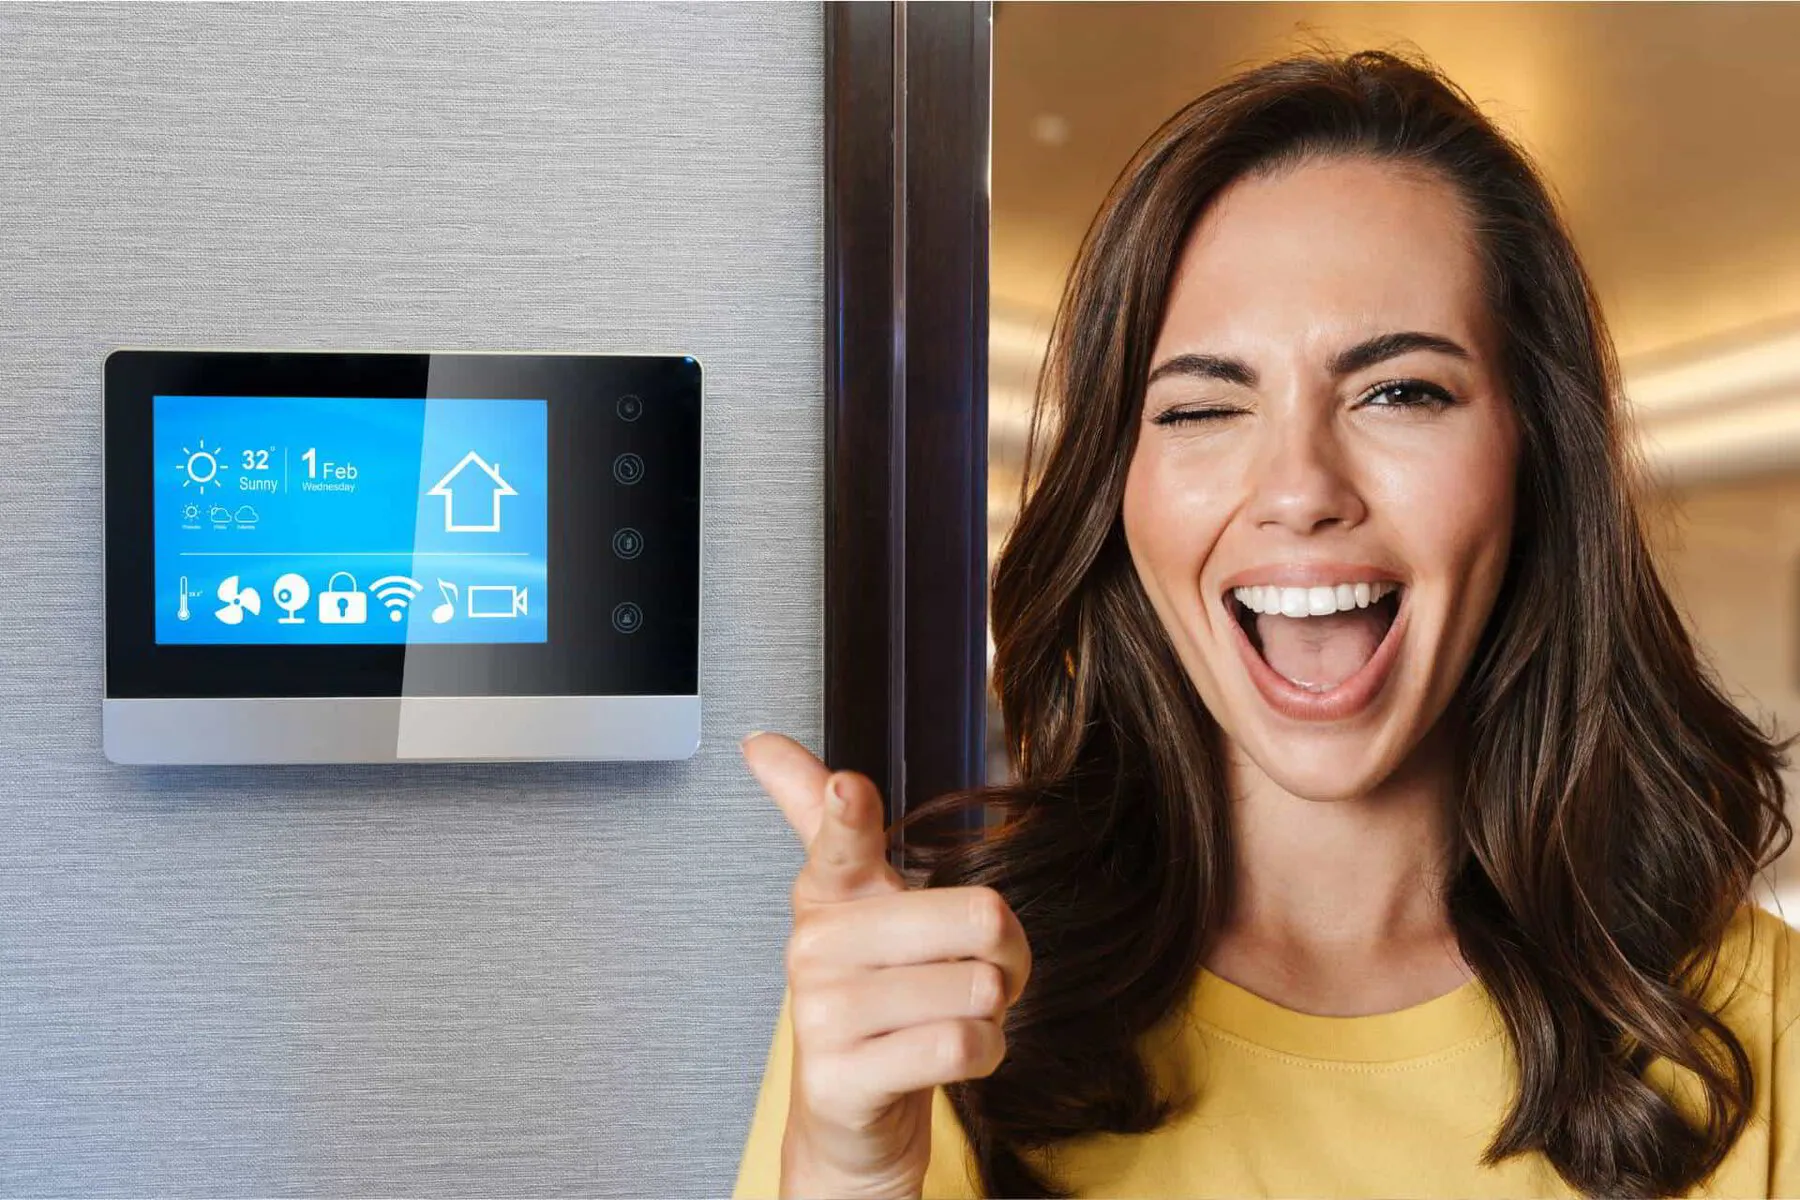 happy woman in front of a smart thermostat